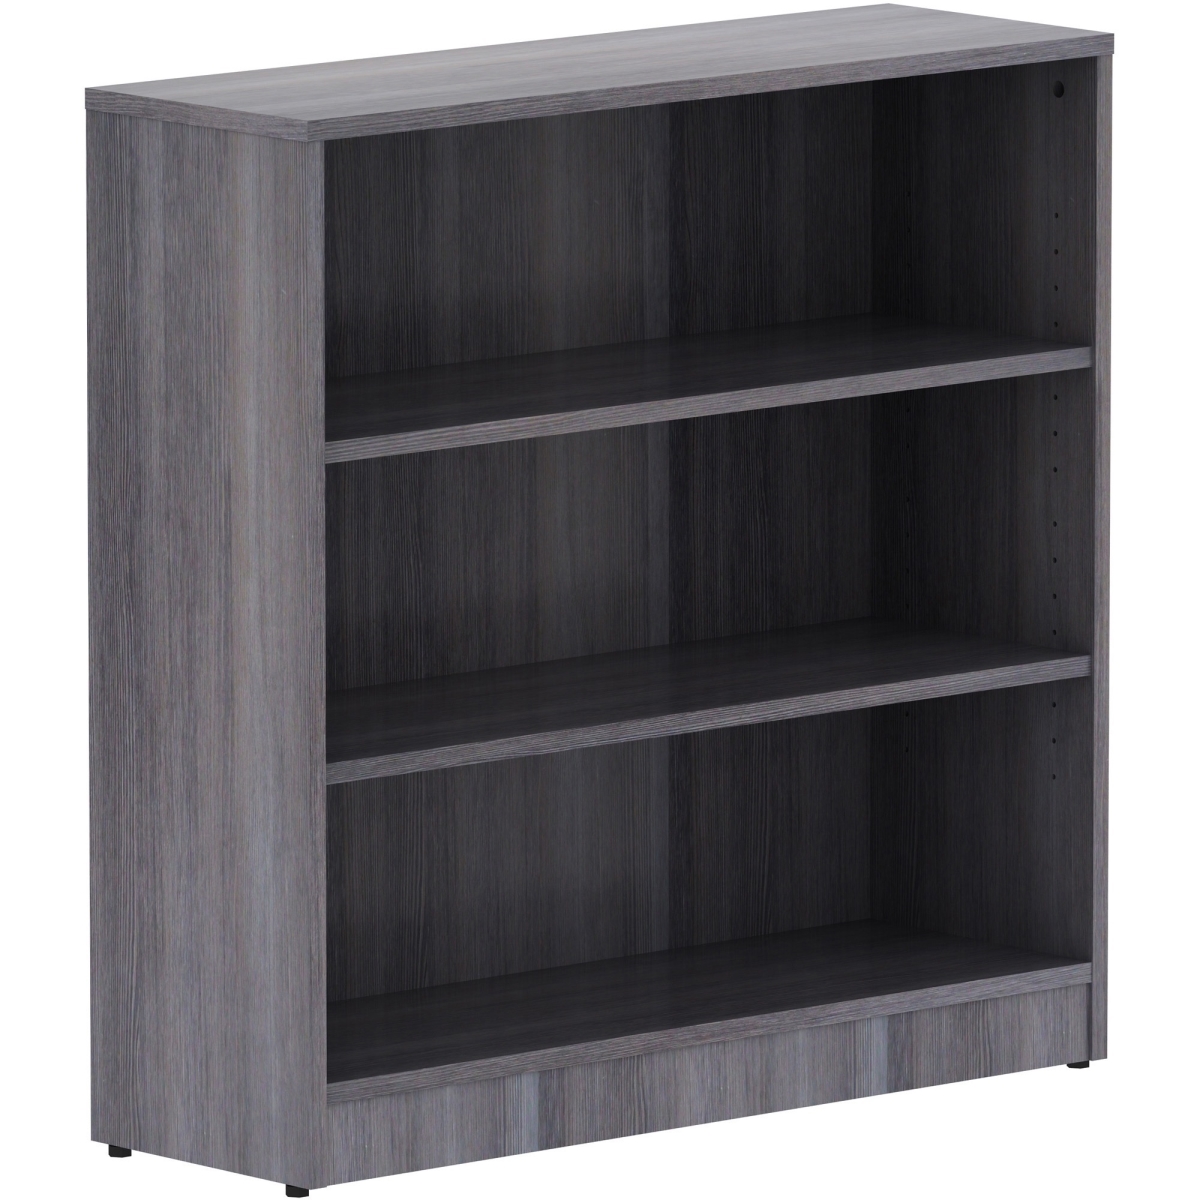 Picture of Lorell LLR69626 Weathered Charcoal Laminate 3 Shelf-Bookcase